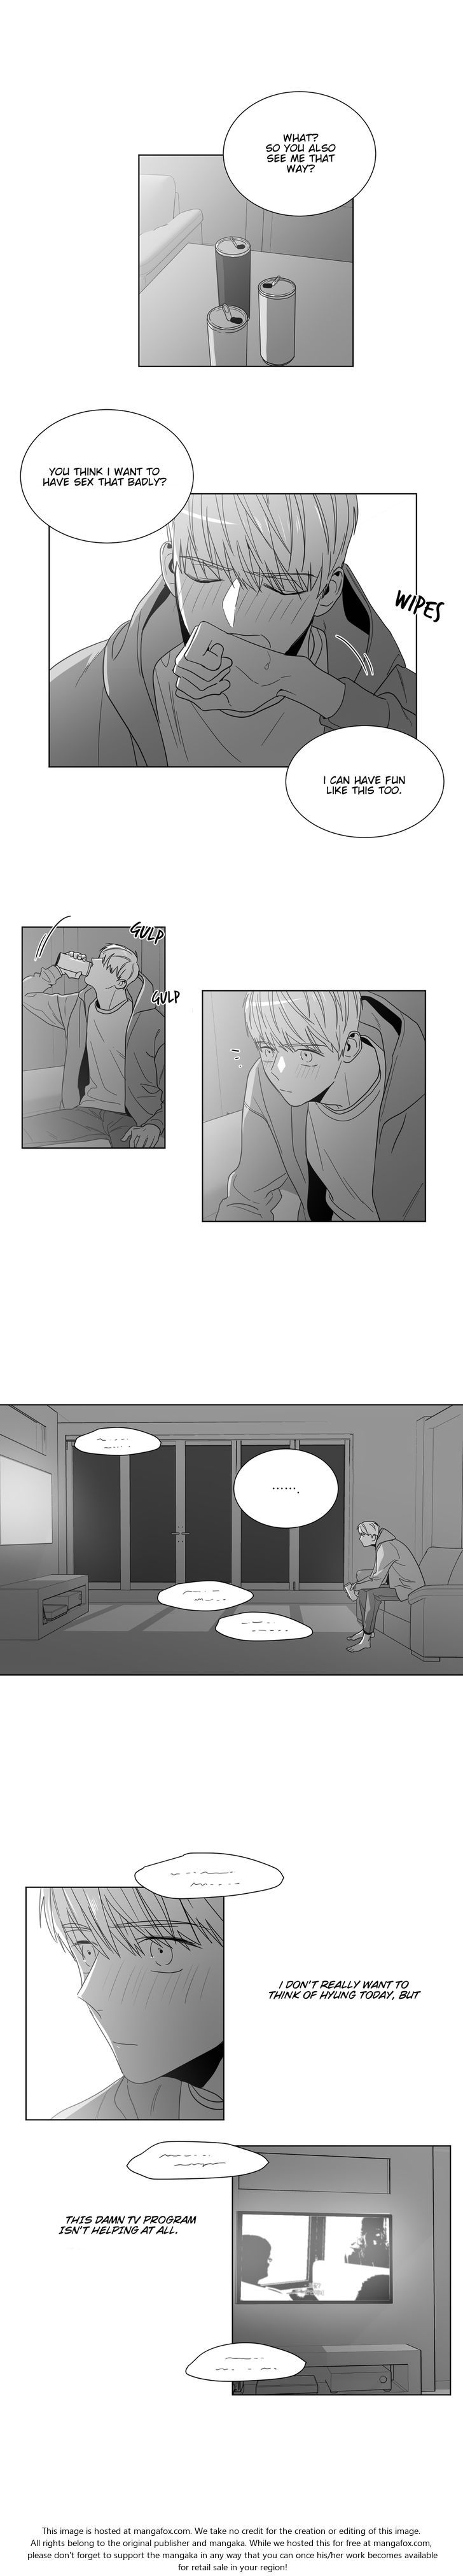 Lover Boy (Lezhin) Chapter 022 page 7